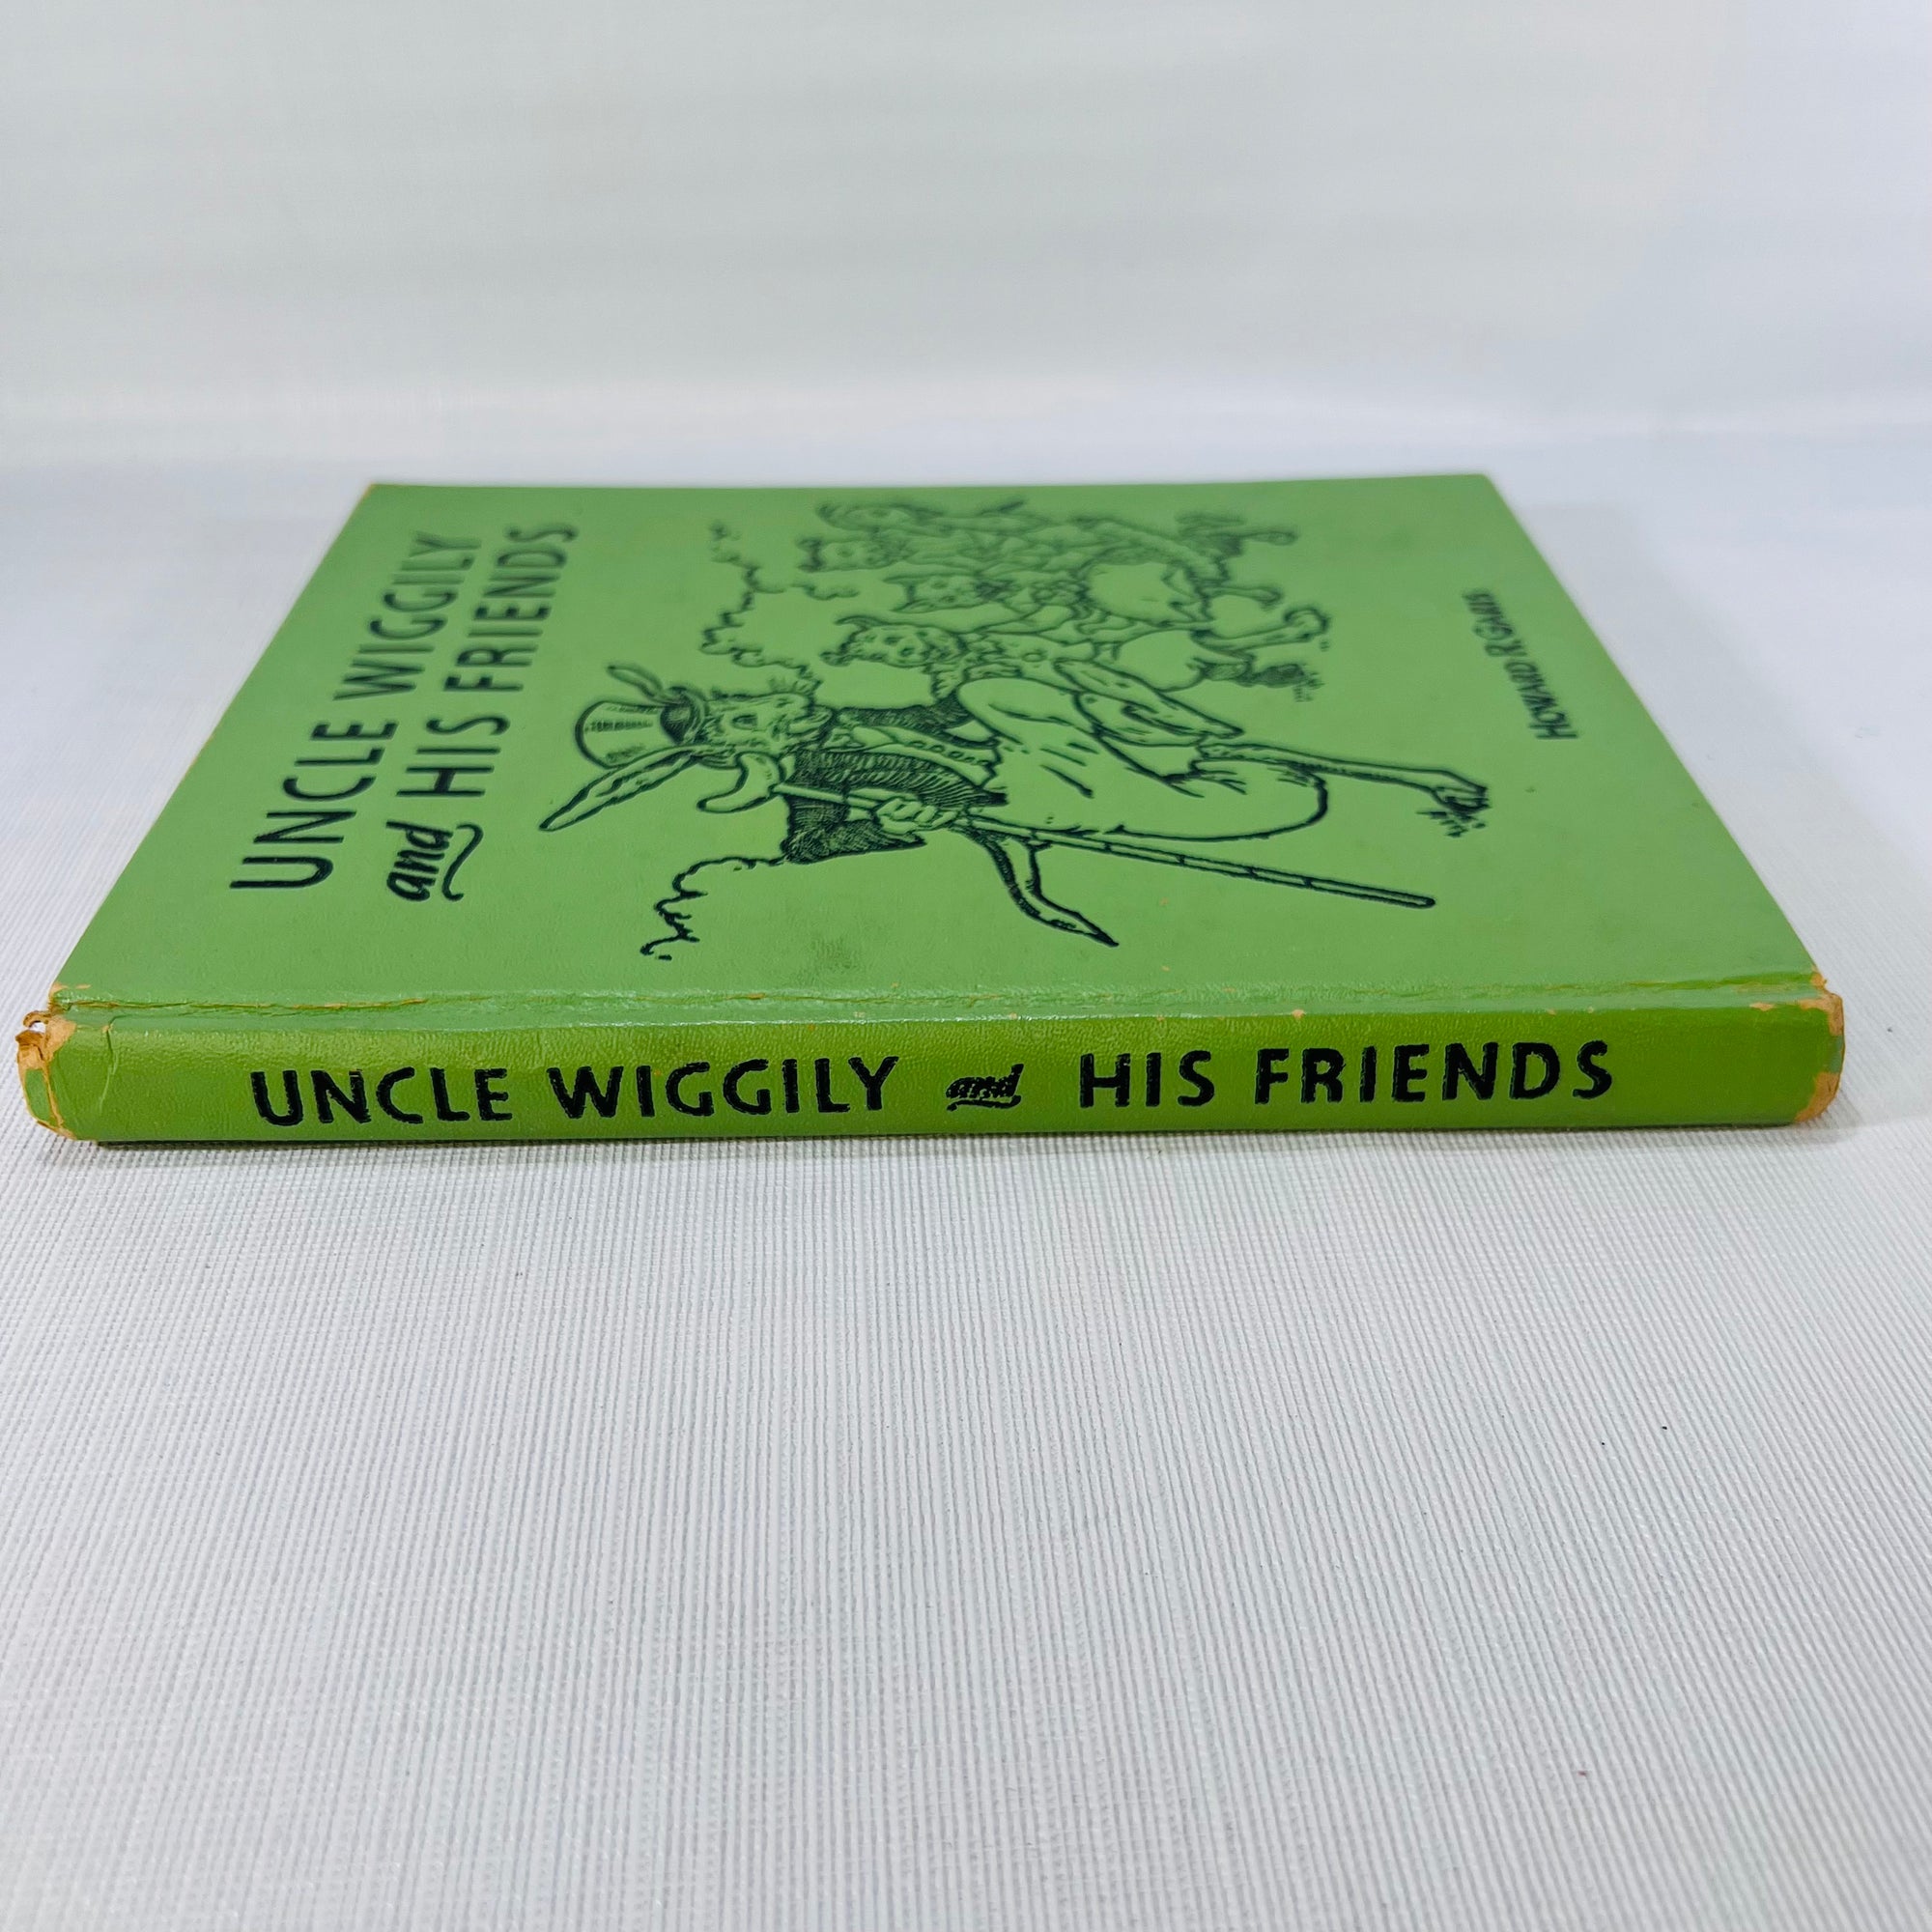 Uncle Wigglily and his Friends by Howard R. Garis 1955 The Platt & Munk Co. Inc.